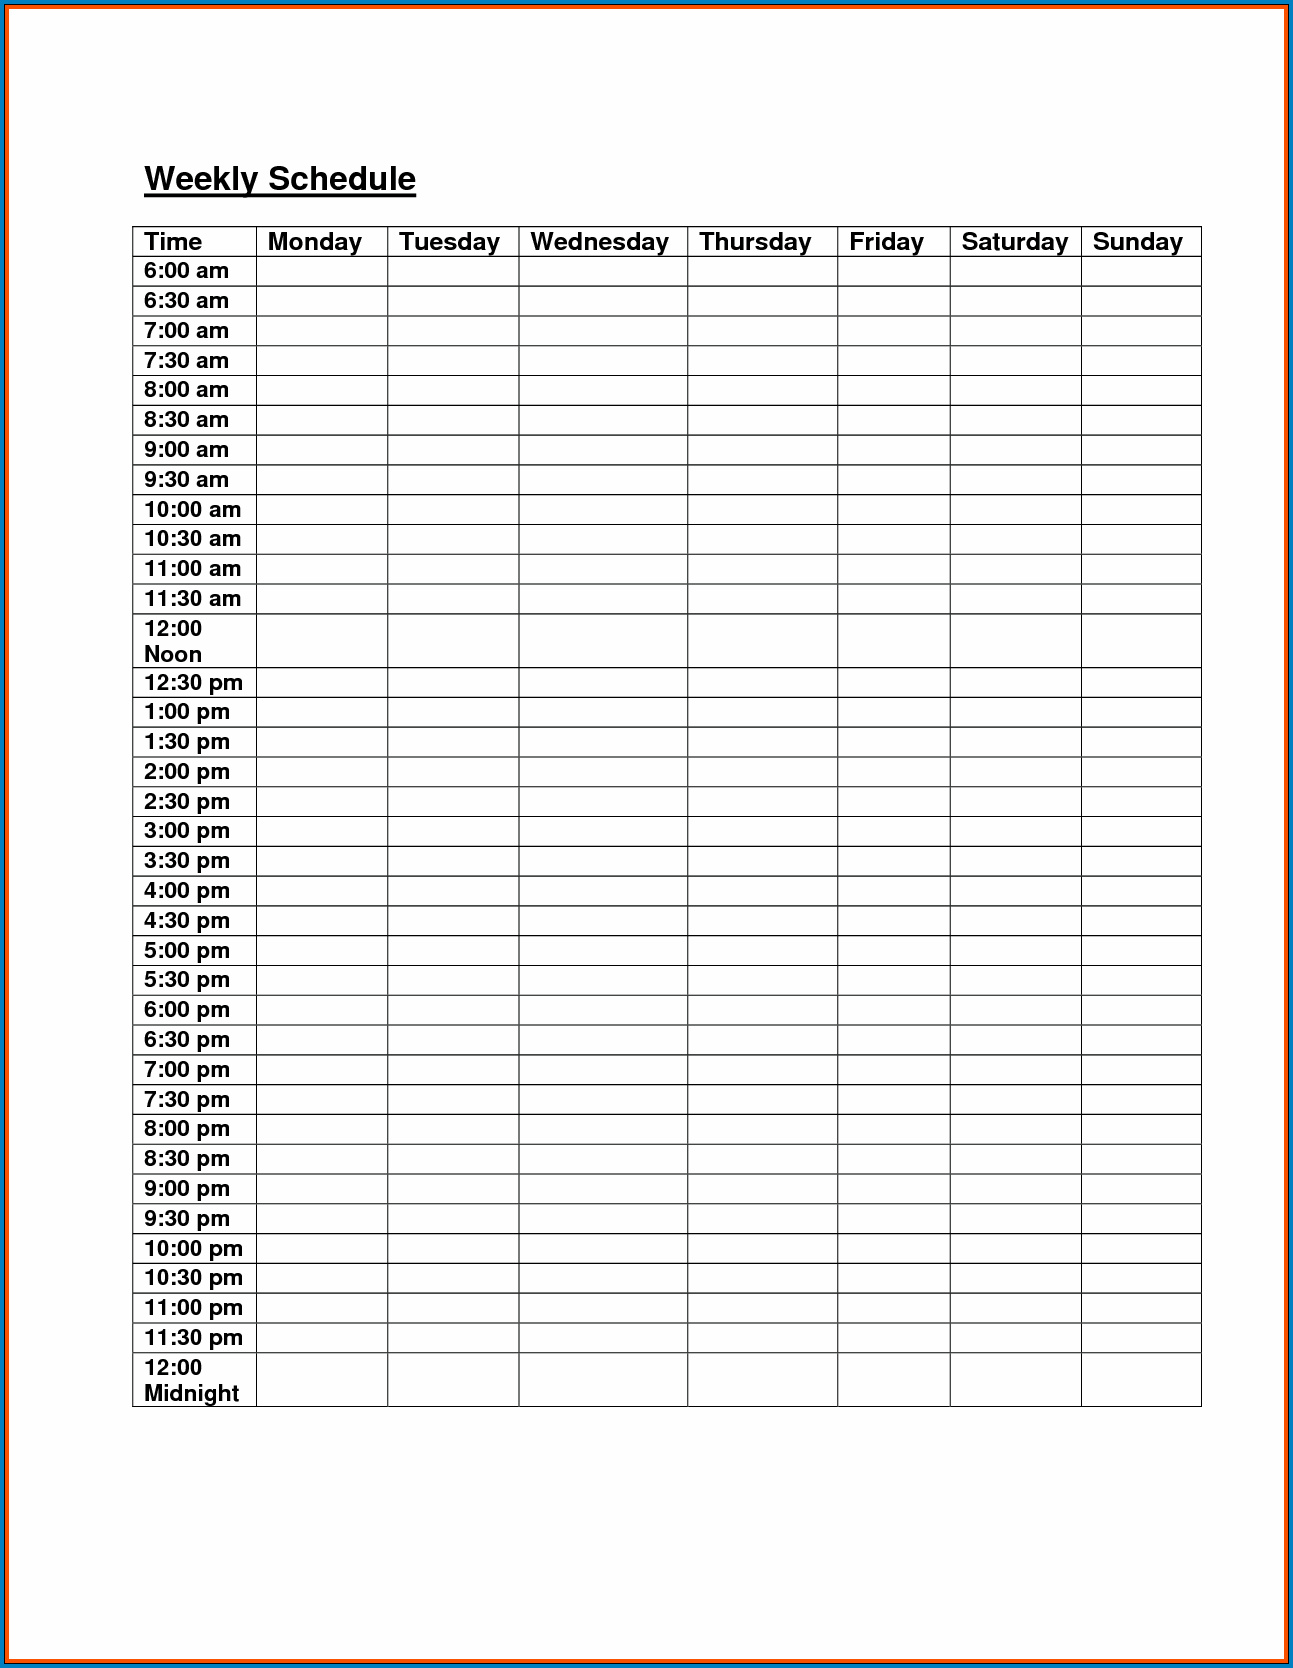 Example of Class Schedule Template